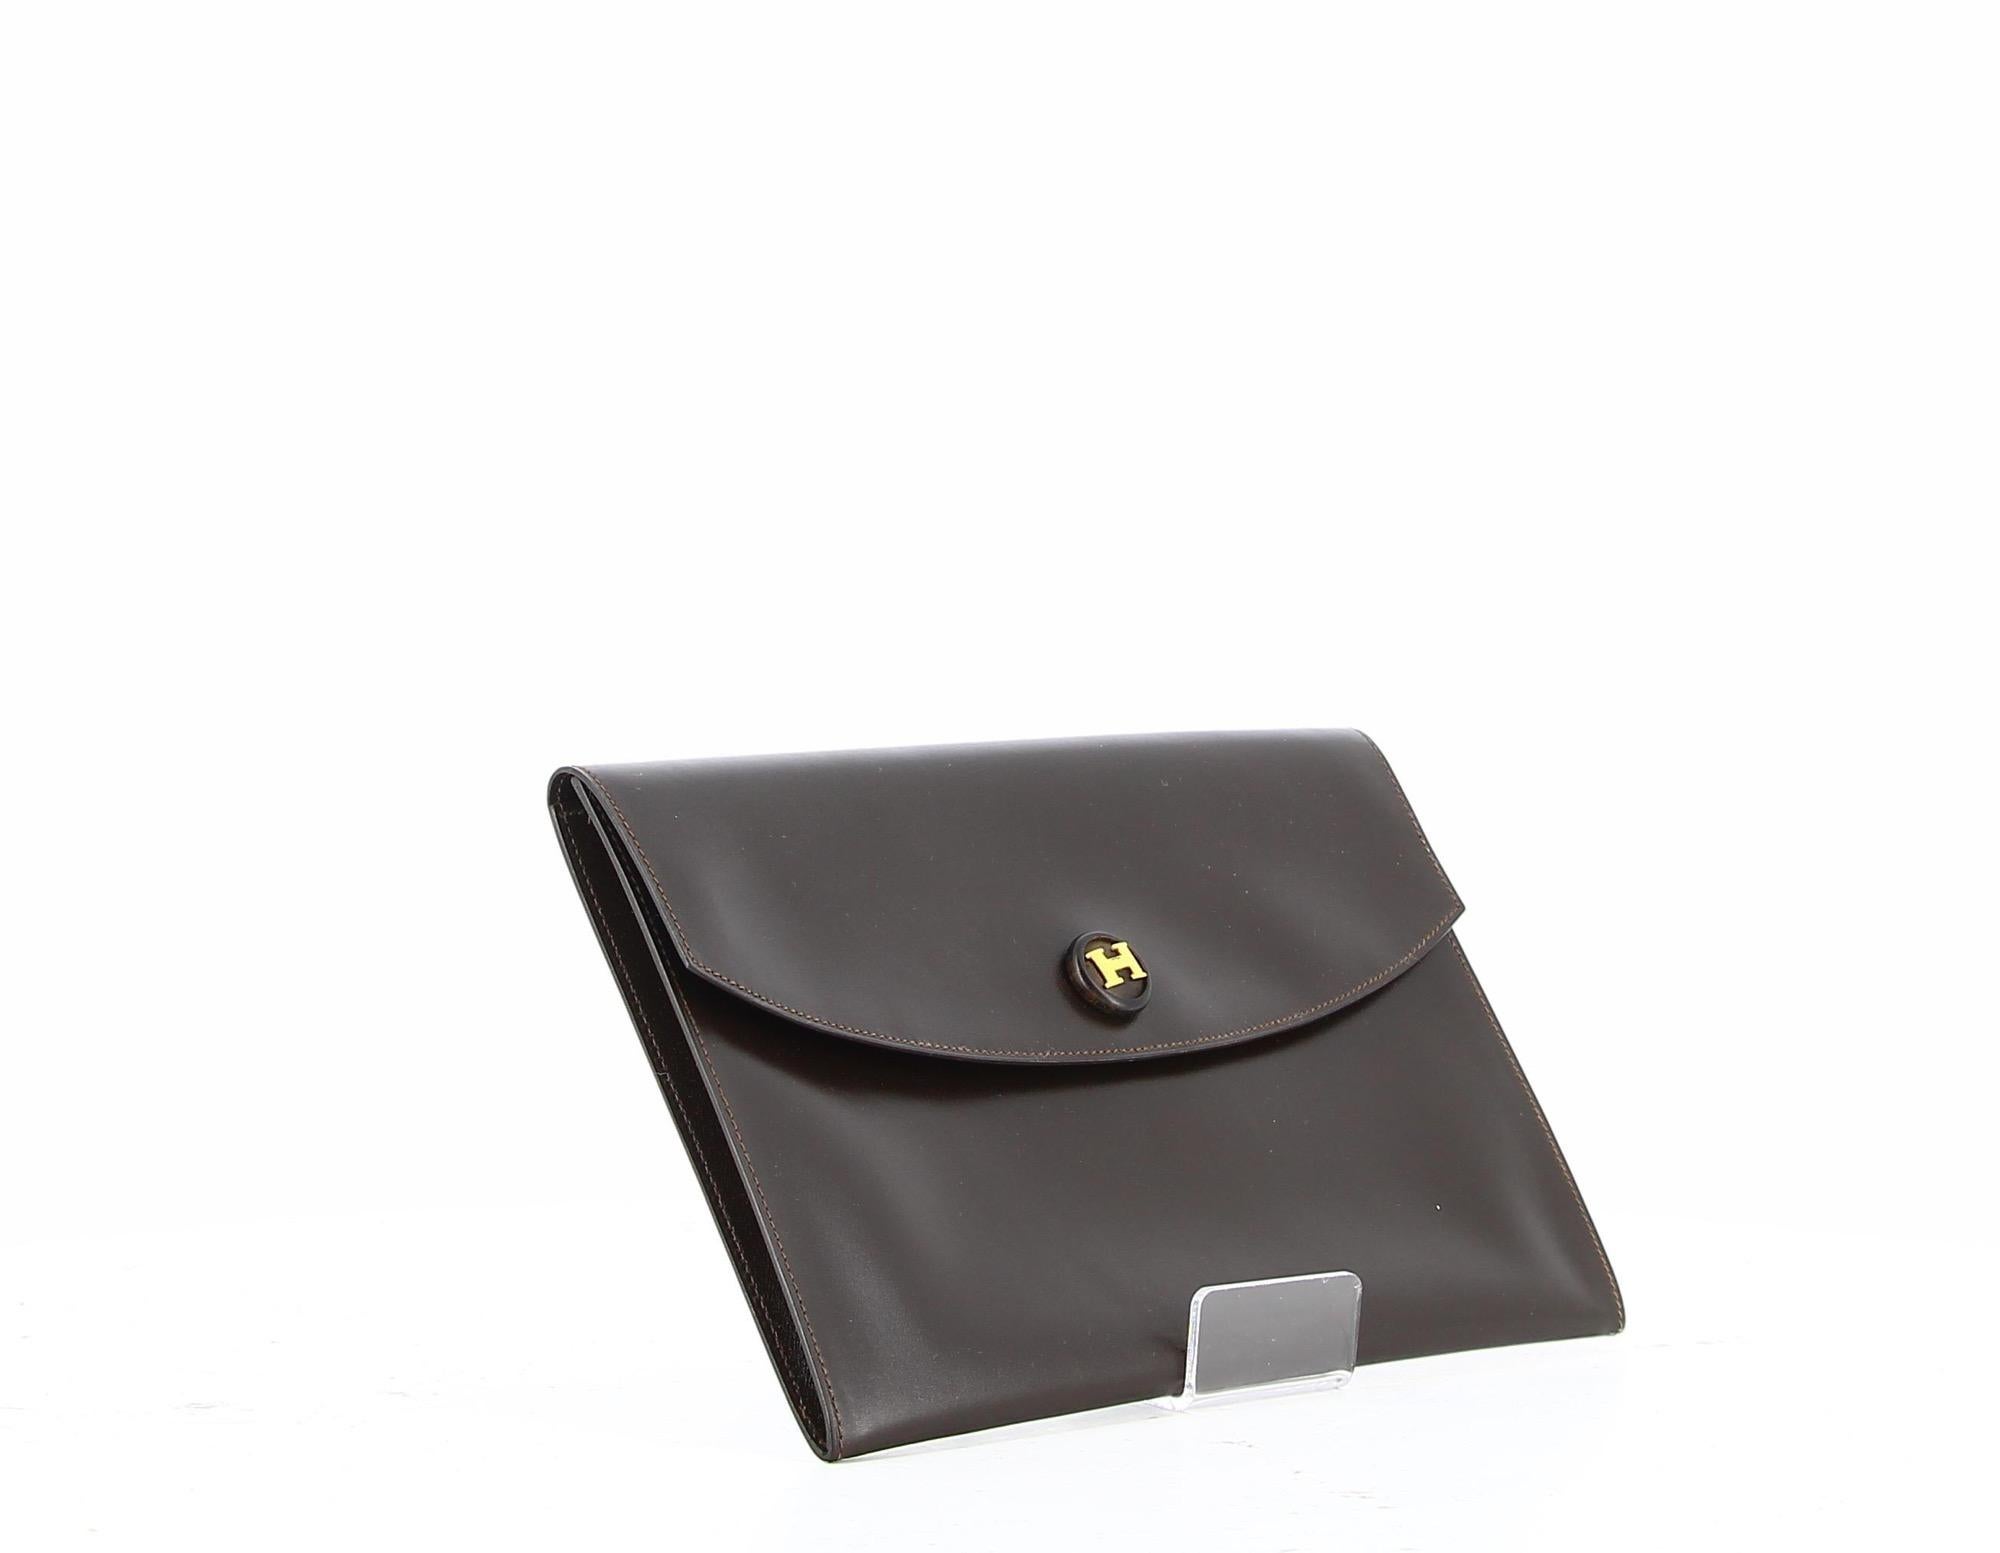 Hermes Box Leather Clutch Bag Rio Brown
Very good condition, shows very slight traces of wear over time.
Brown clutch in smooth leather that can be worn in everyday life. The emblem of the house Hermes is the H and the clasp in gold.
Height 16 cm /